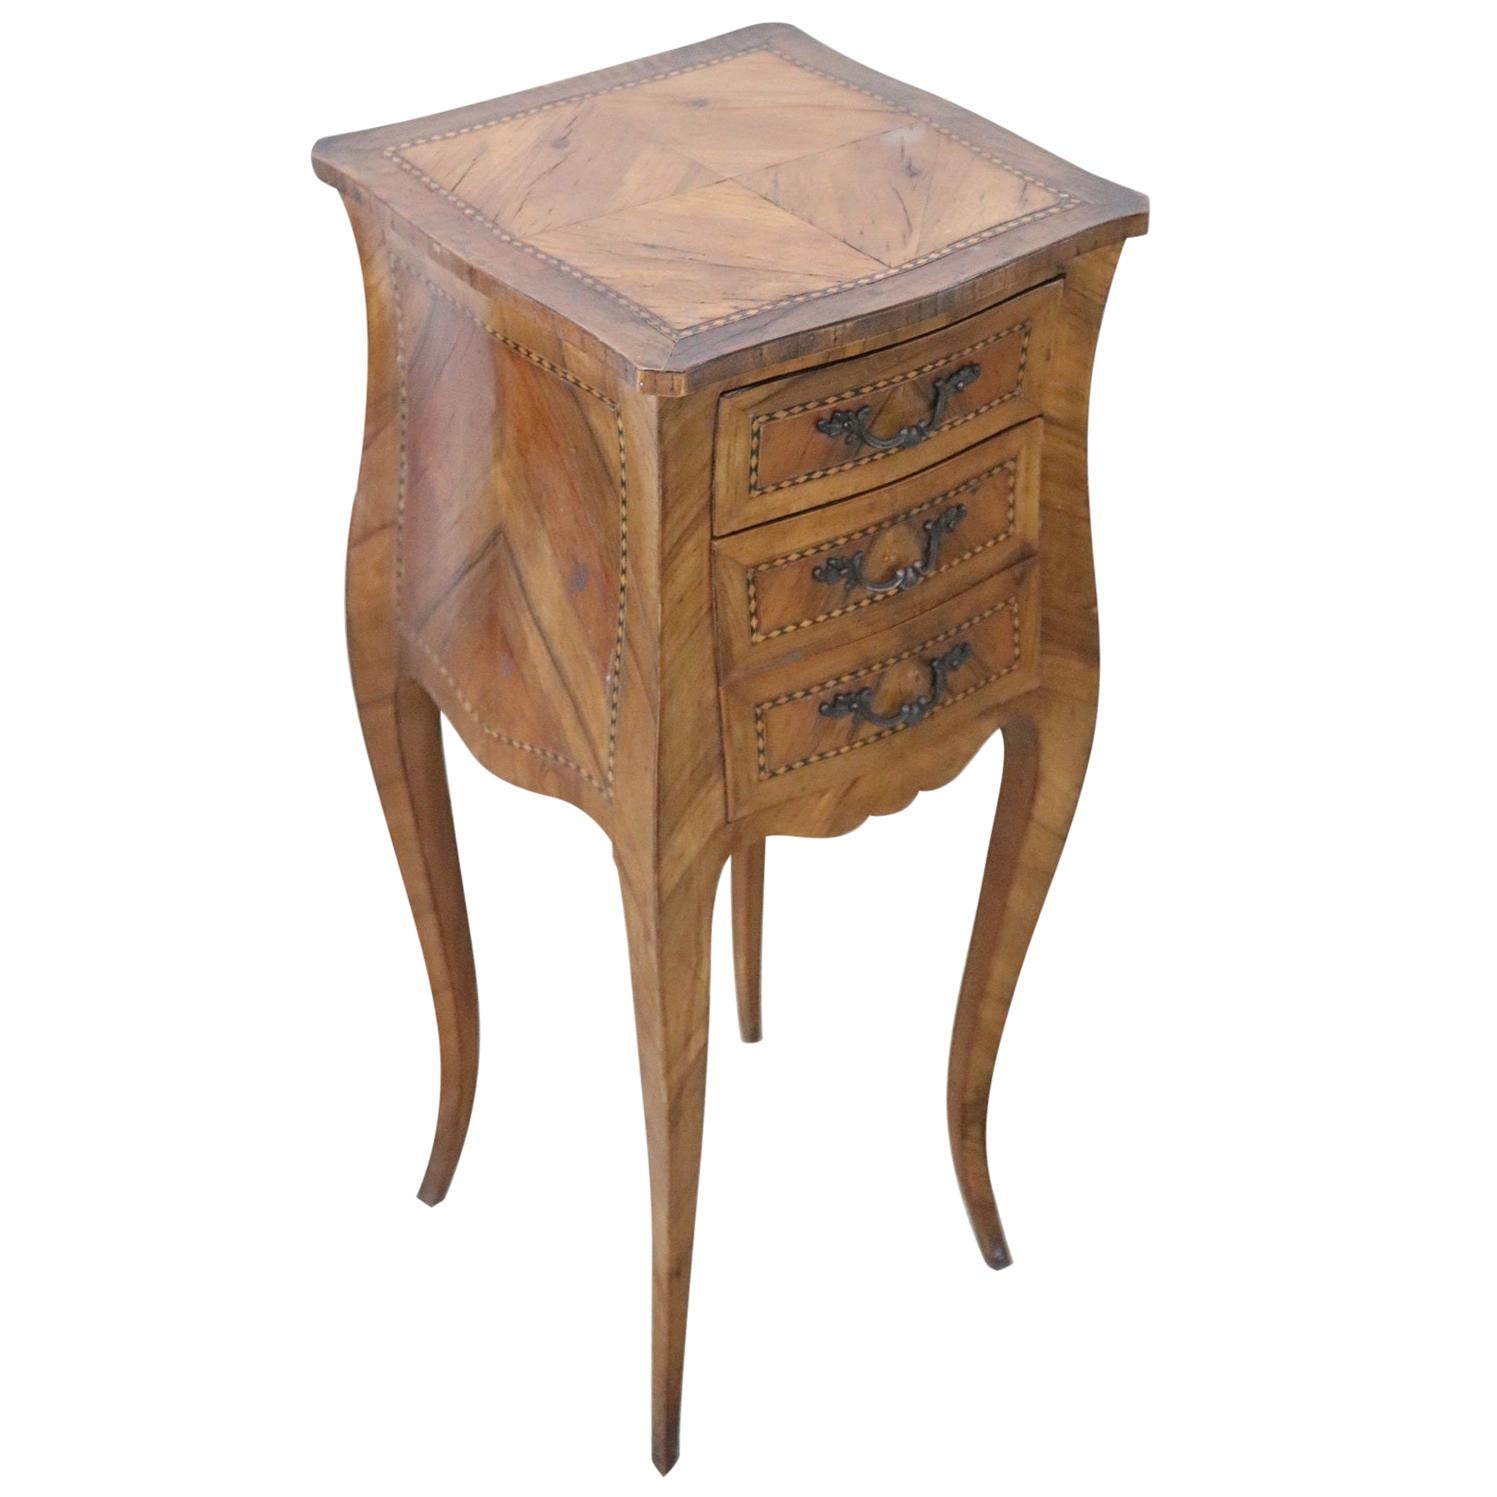 20th Century French Louis XV Style Inlaid Walnut Side Table or Nightstand